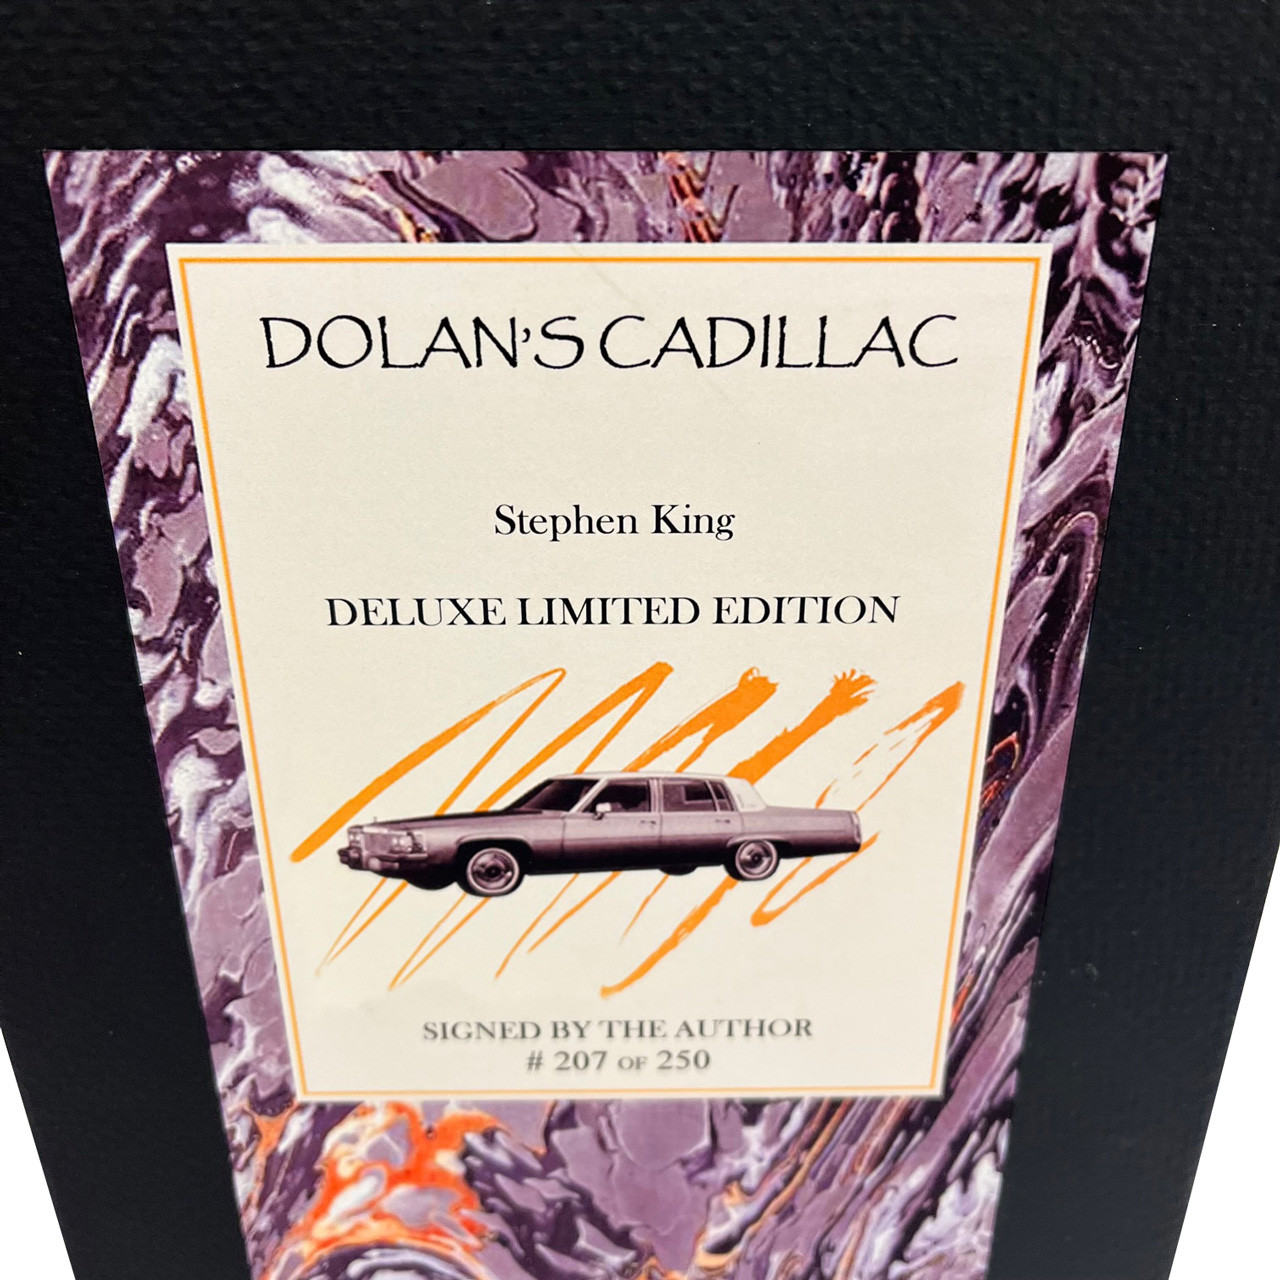 Stephen King "Dolan's Cadillac" Signed First Edition, Deluxe Limited Edition No. 207 of 250, Custom Numbers Matching Slipcase